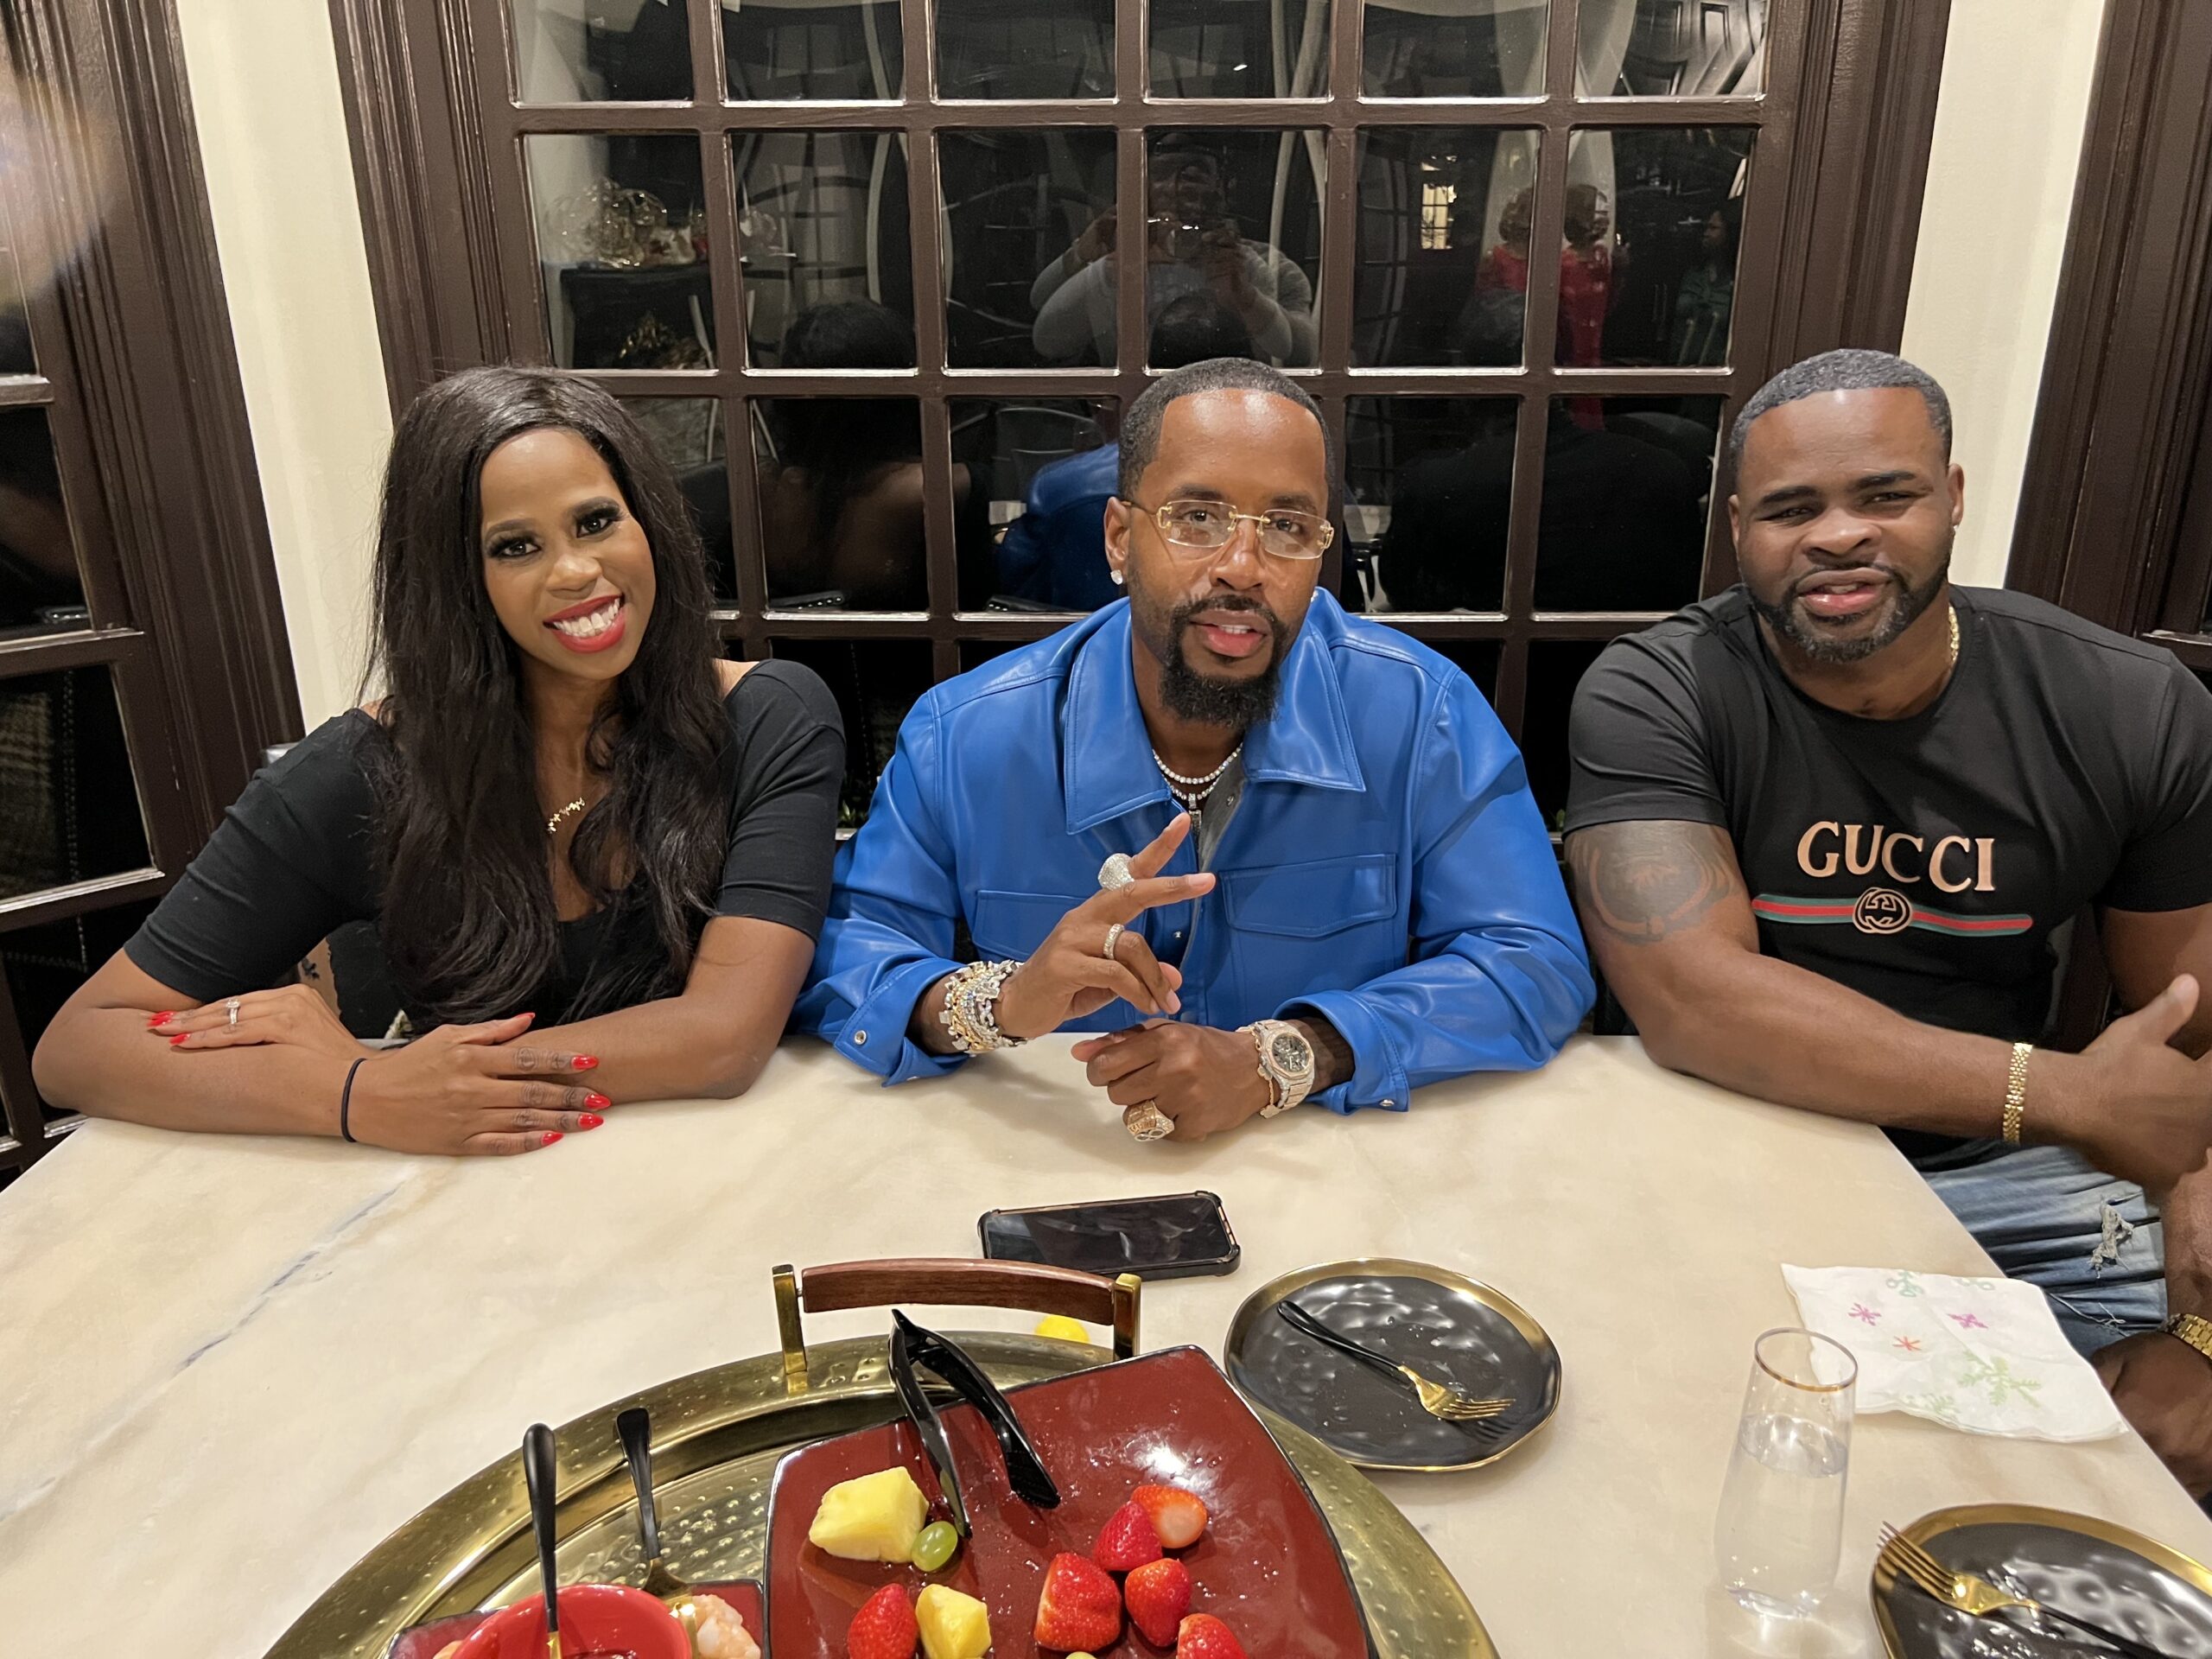 Meet DR Ayo Gathings Relationship And Life Coach To Love And Hip Hop Reality Star Safaree Samuels